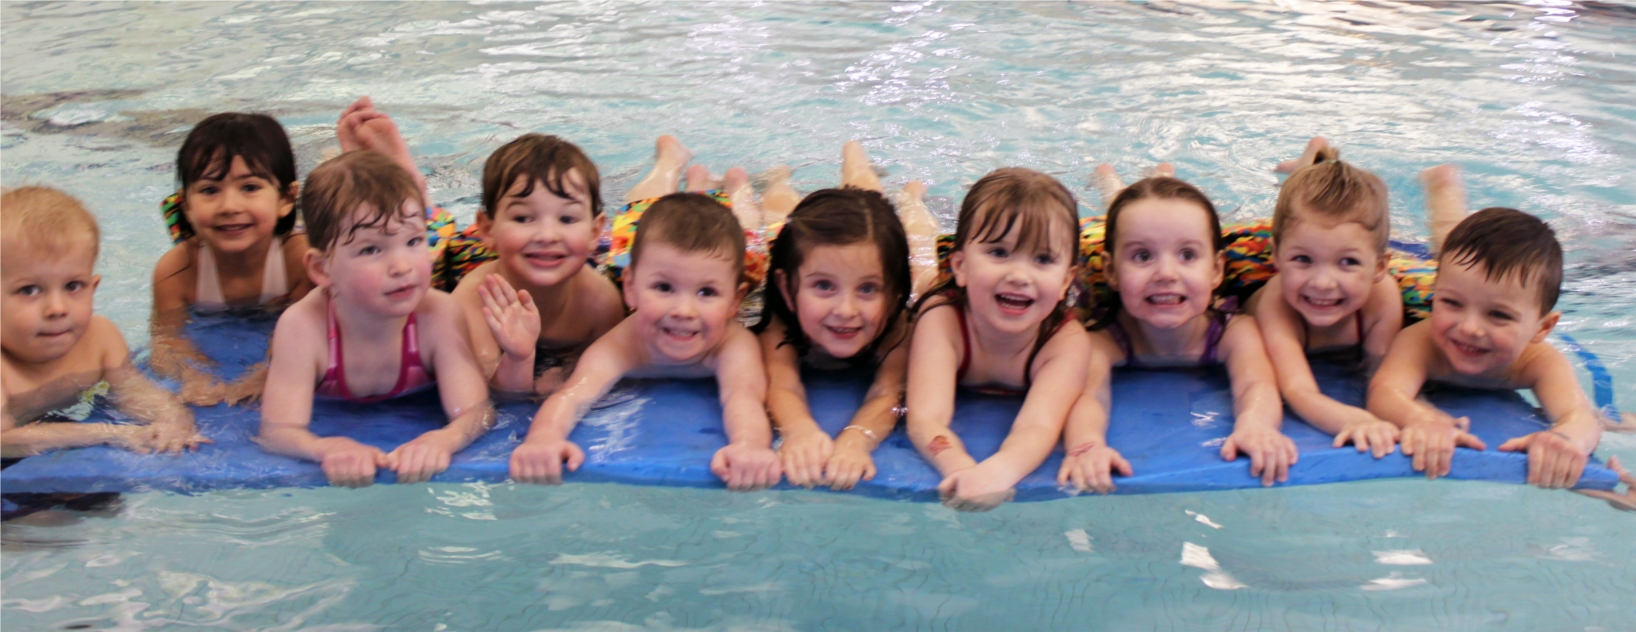 Preschoolers learning how to swim...and having fun!